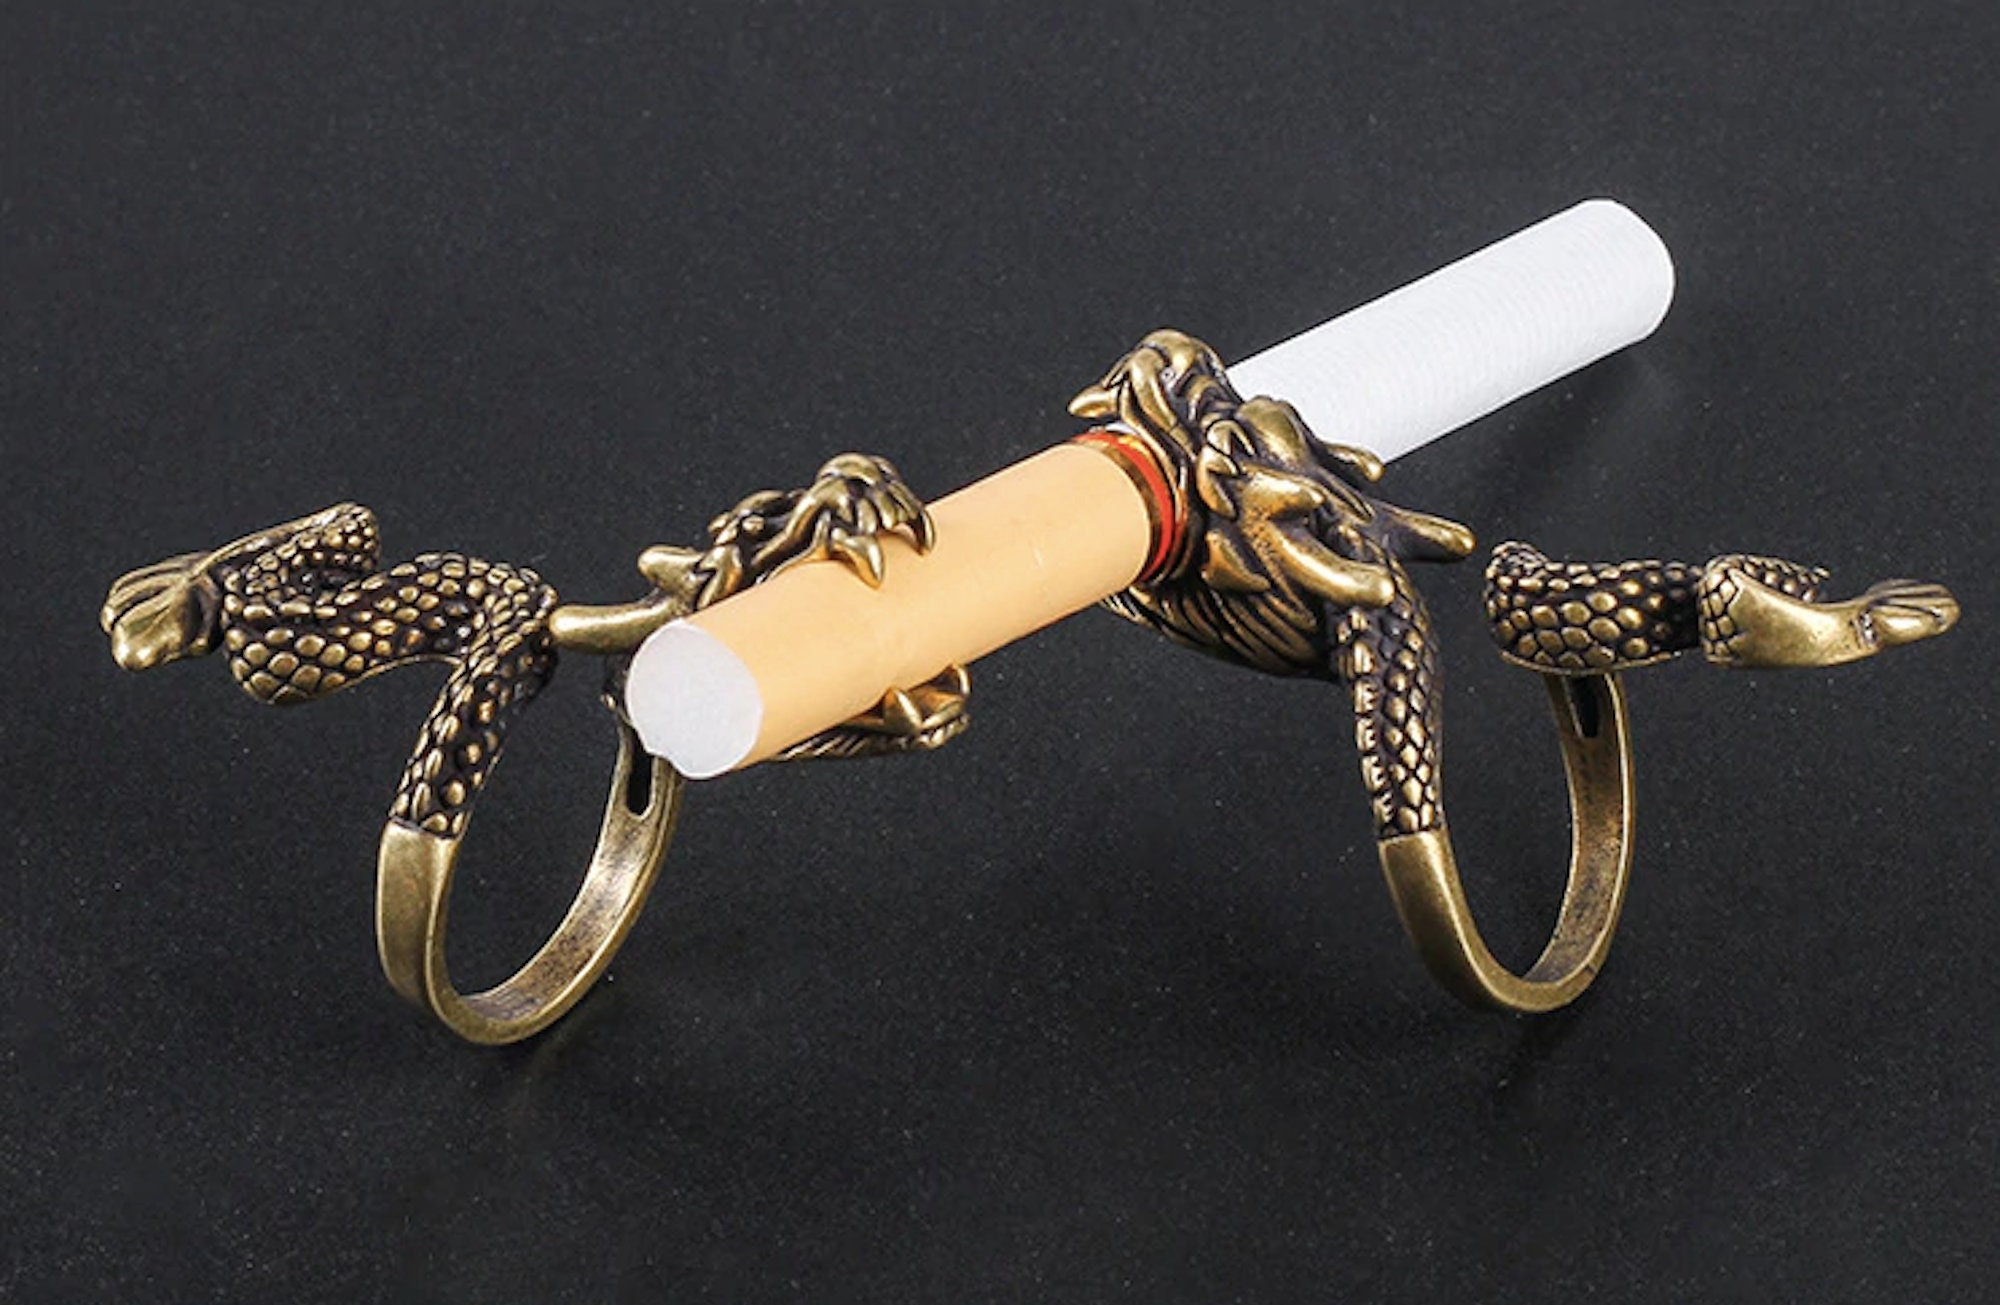 1pc Zinc Alloy Fashionable & Personalized Dragon Shaped Cigarette Holder  Ring Suitable For Men's Daily Wear